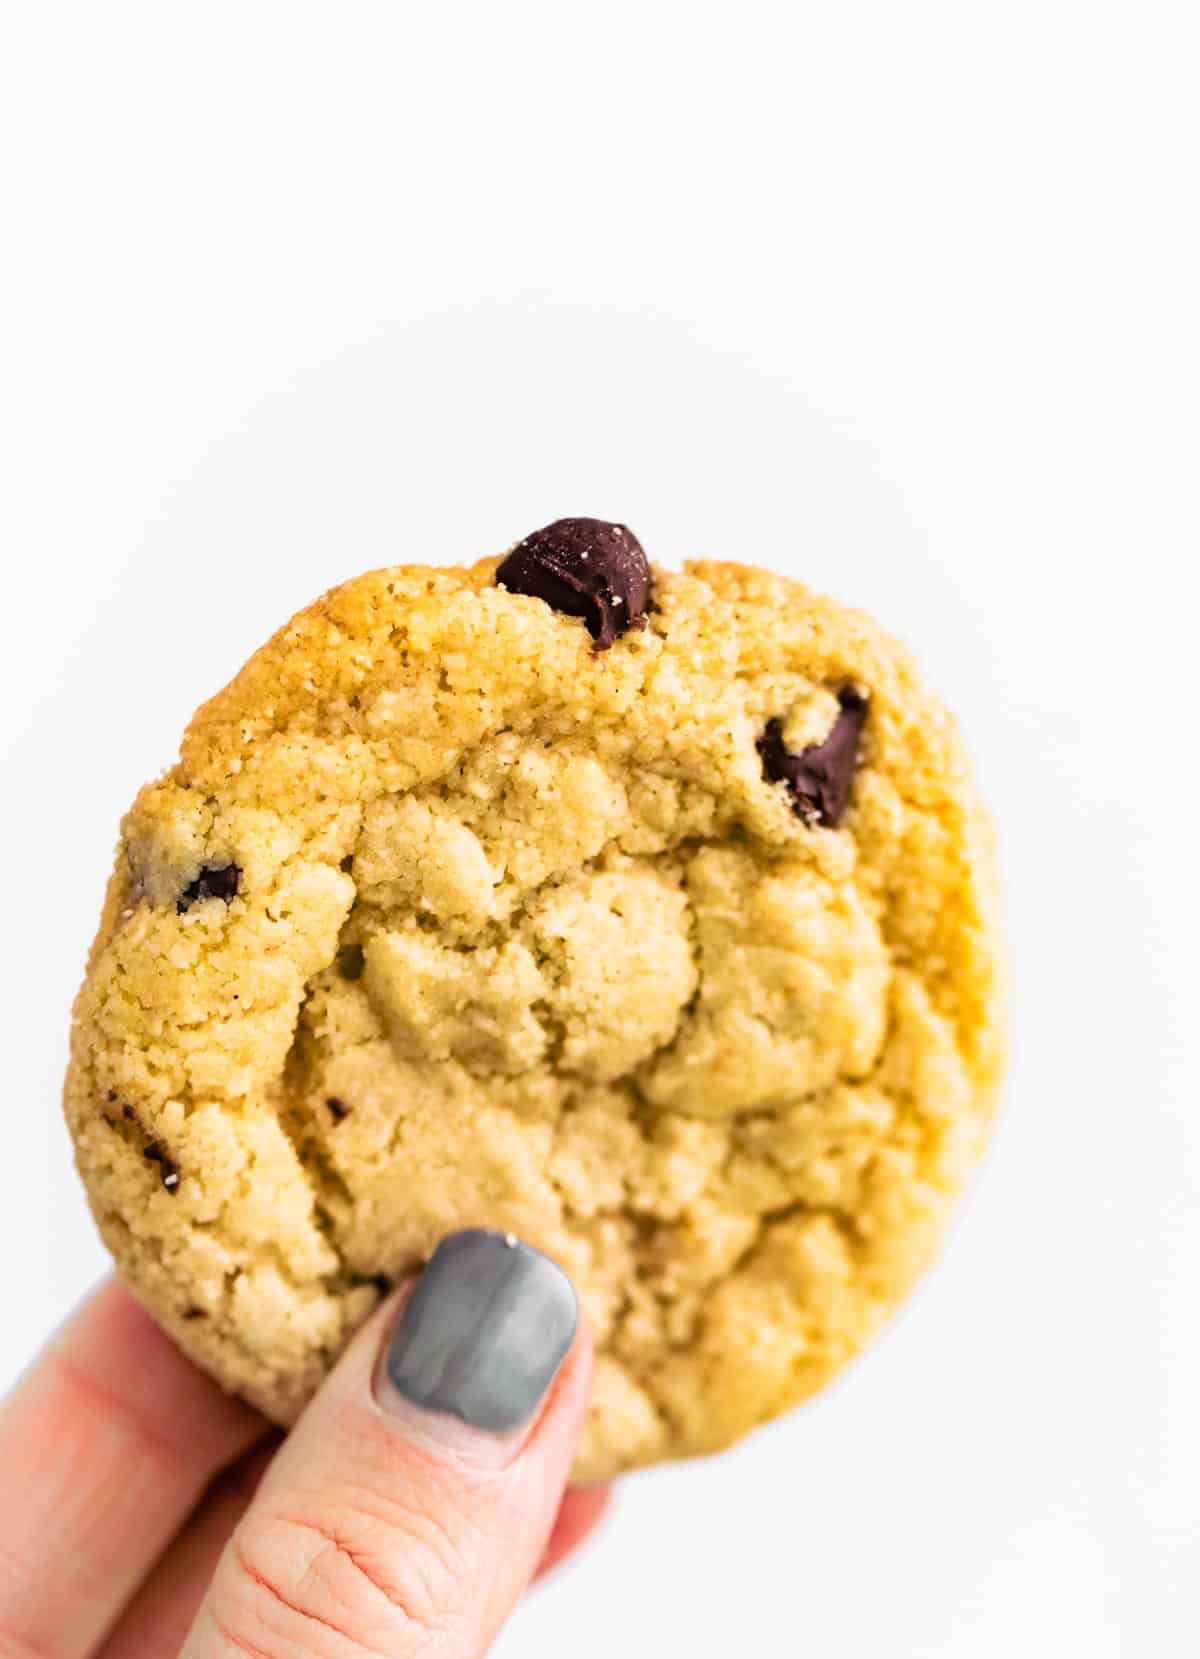 Womans hands holding up vegan chocolate chip cookie from side